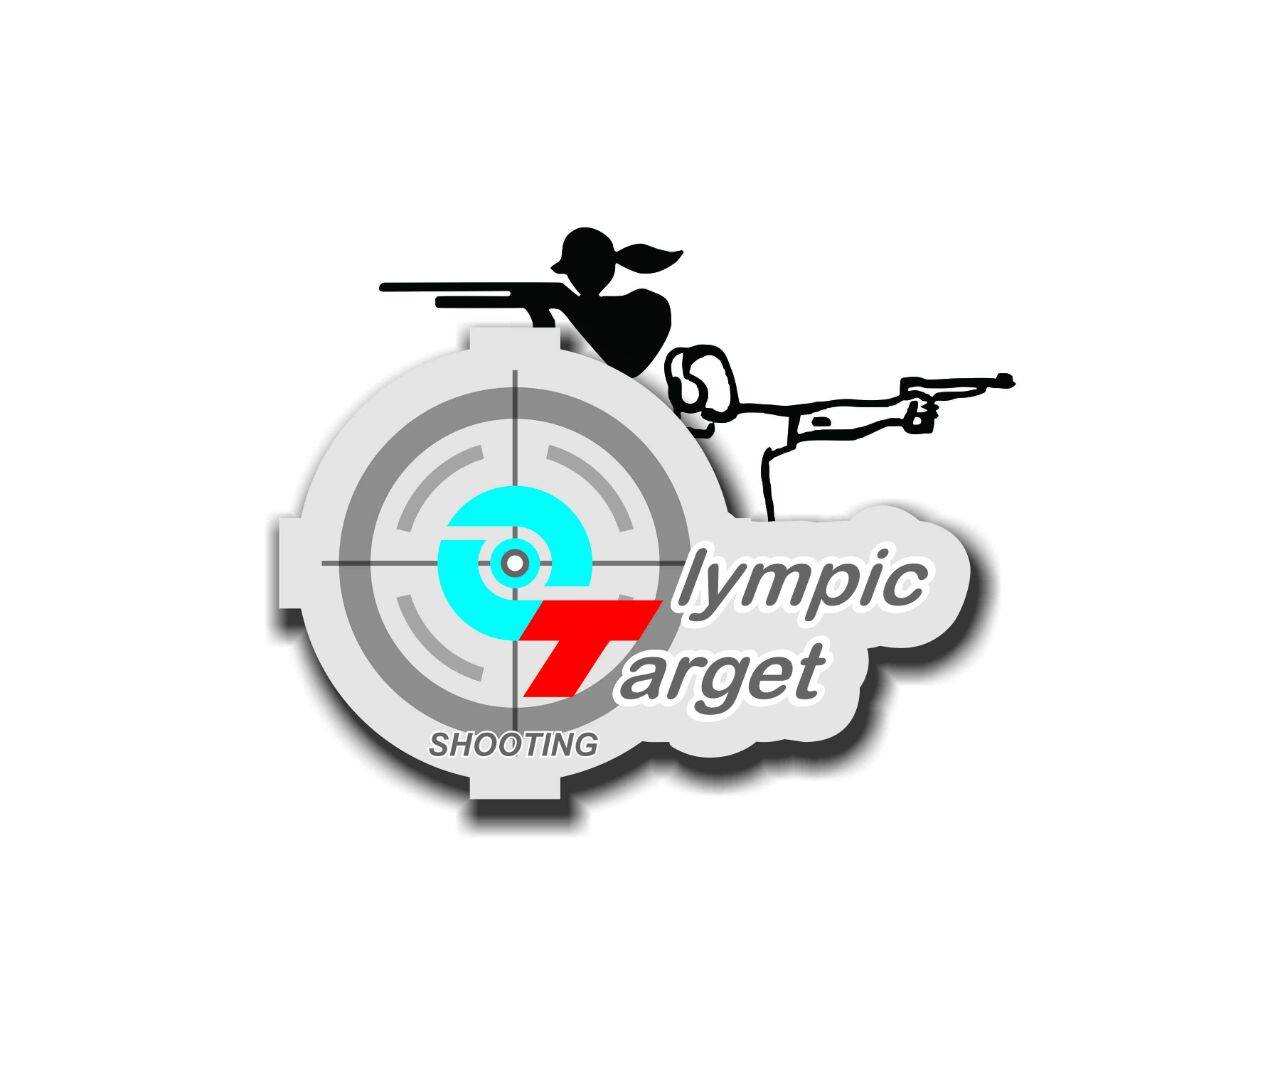 283 Trap Shooting Logo Images, Stock Photos, 3D objects, & Vectors |  Shutterstock